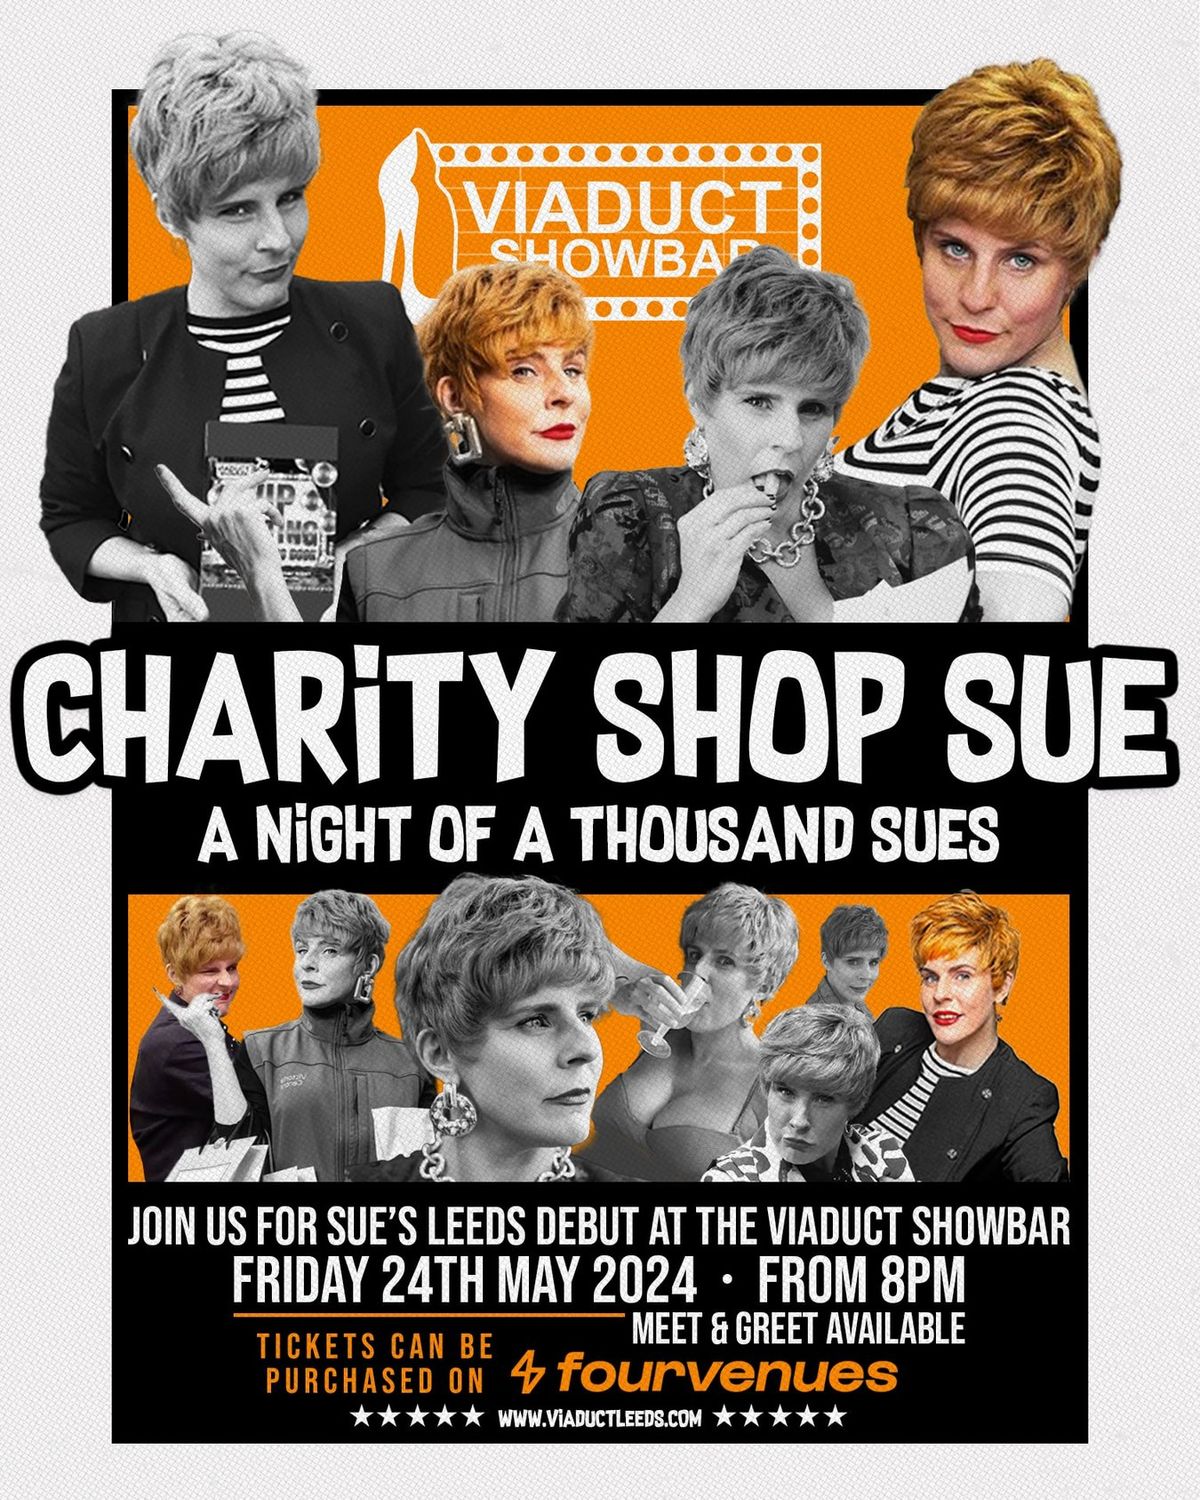 THE VIADUCT PRESENTS: Charity Shop Sue!